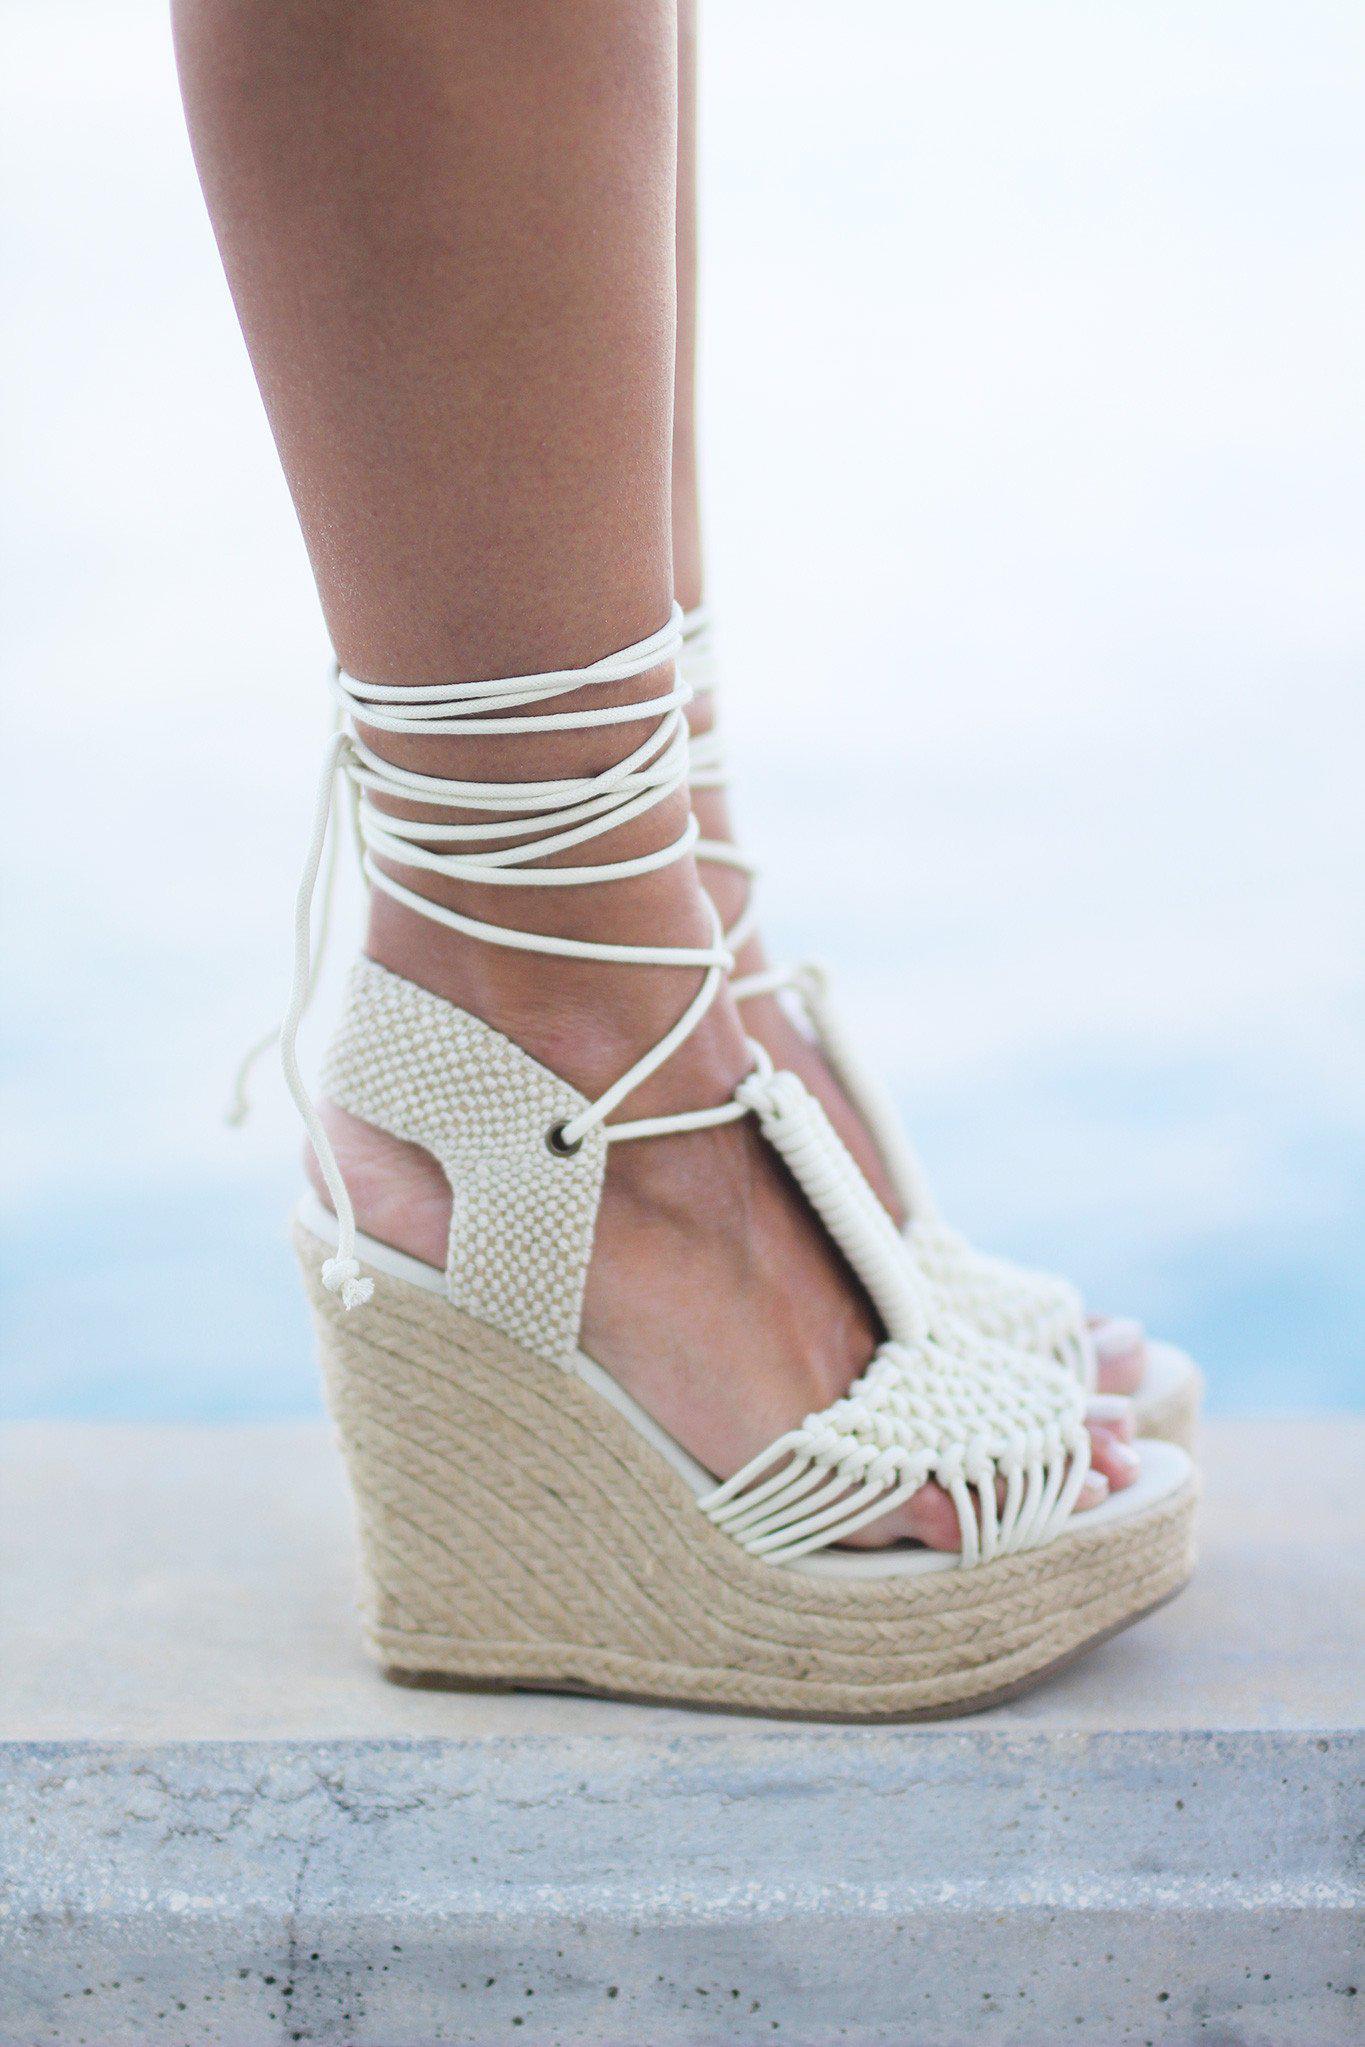 Off White Rope Wedges | Lace up Wedges | Summer Wedges – Saved by the Dress